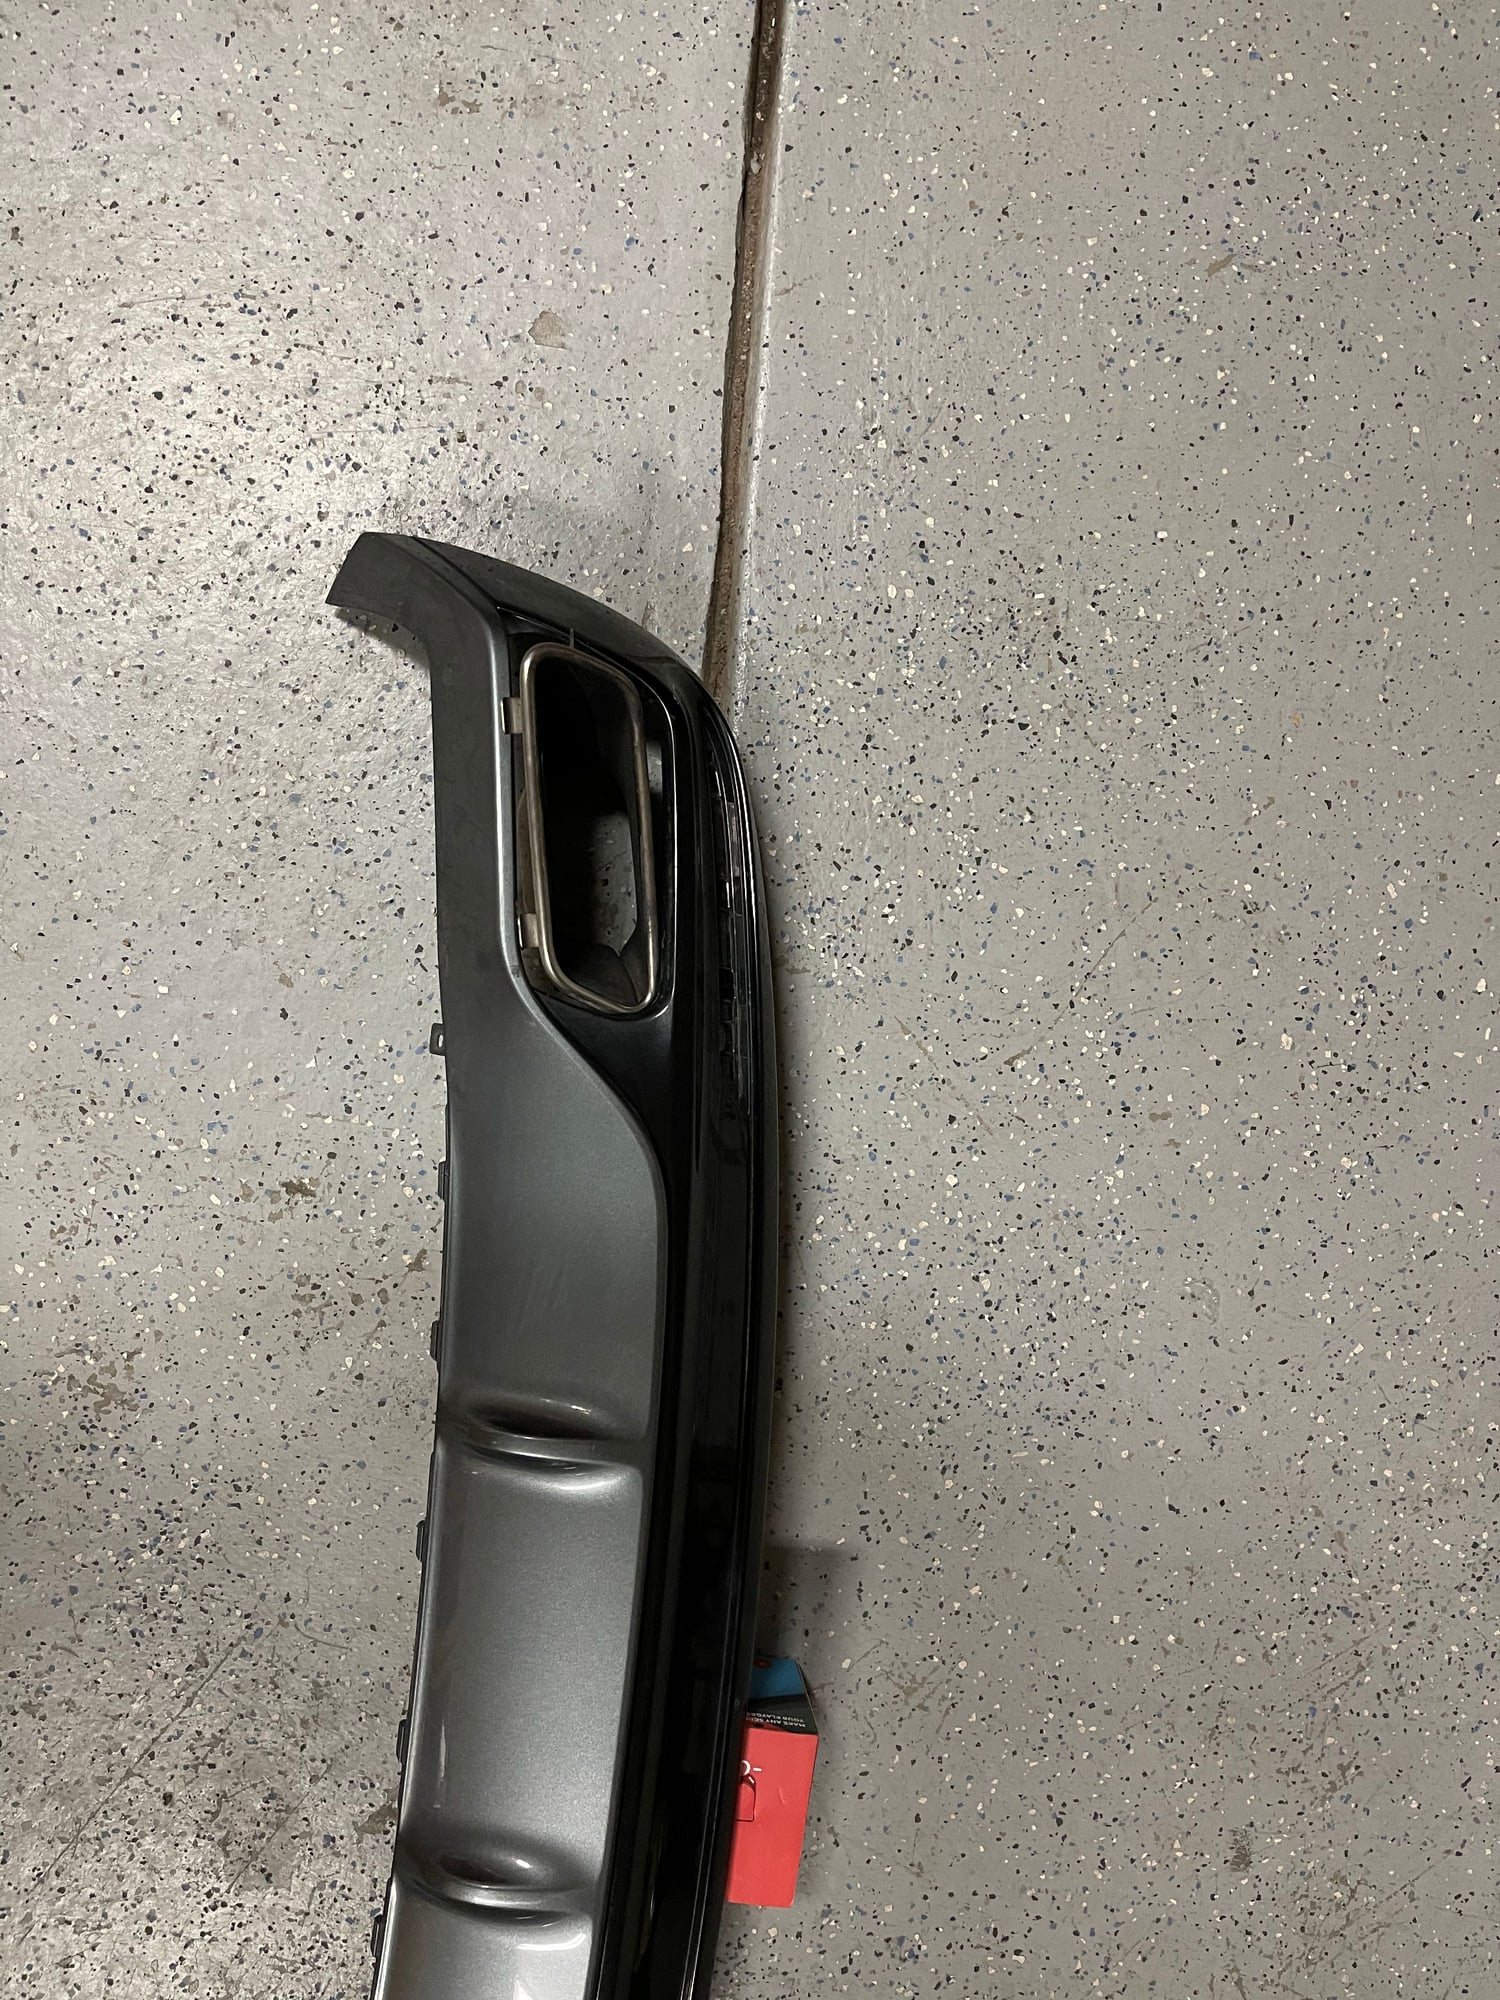 Exterior Body Parts - Mercedes OEM rear diffuser & exhaust tips C217 S550 coupe - perfect condition - $450 - Used - 2014 to 2017 Mercedes-Benz S550 - Centennial, CO 80016, United States